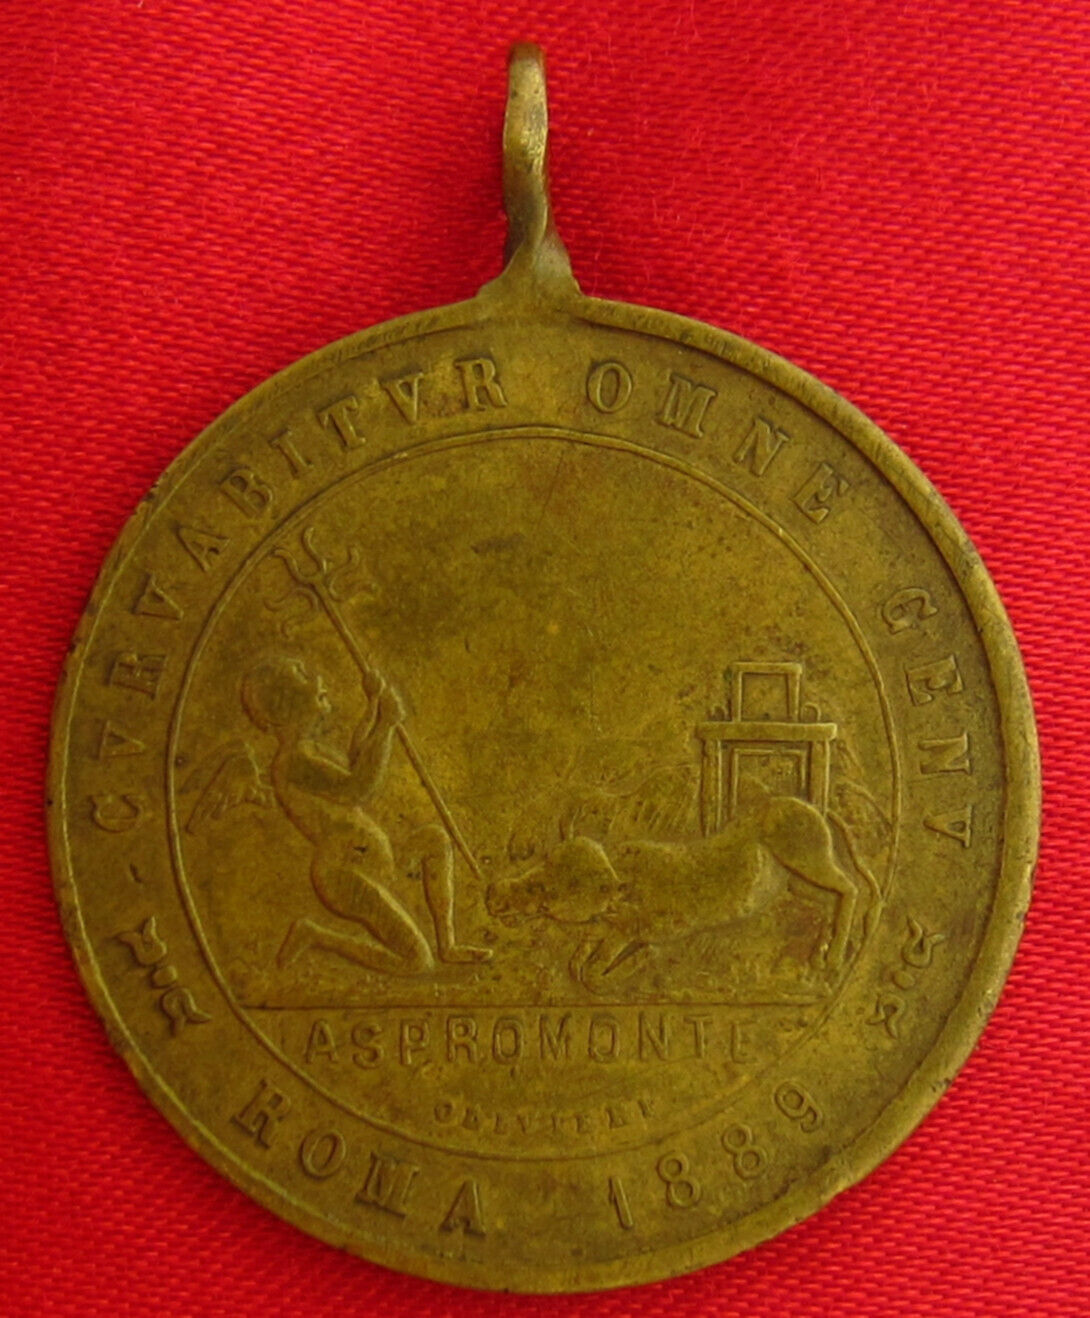 ANTIQUE MARY JESUS ANGEL Medal EVERY KNEE SHALL BEND GERACE ITALY OLIVIERI 1889